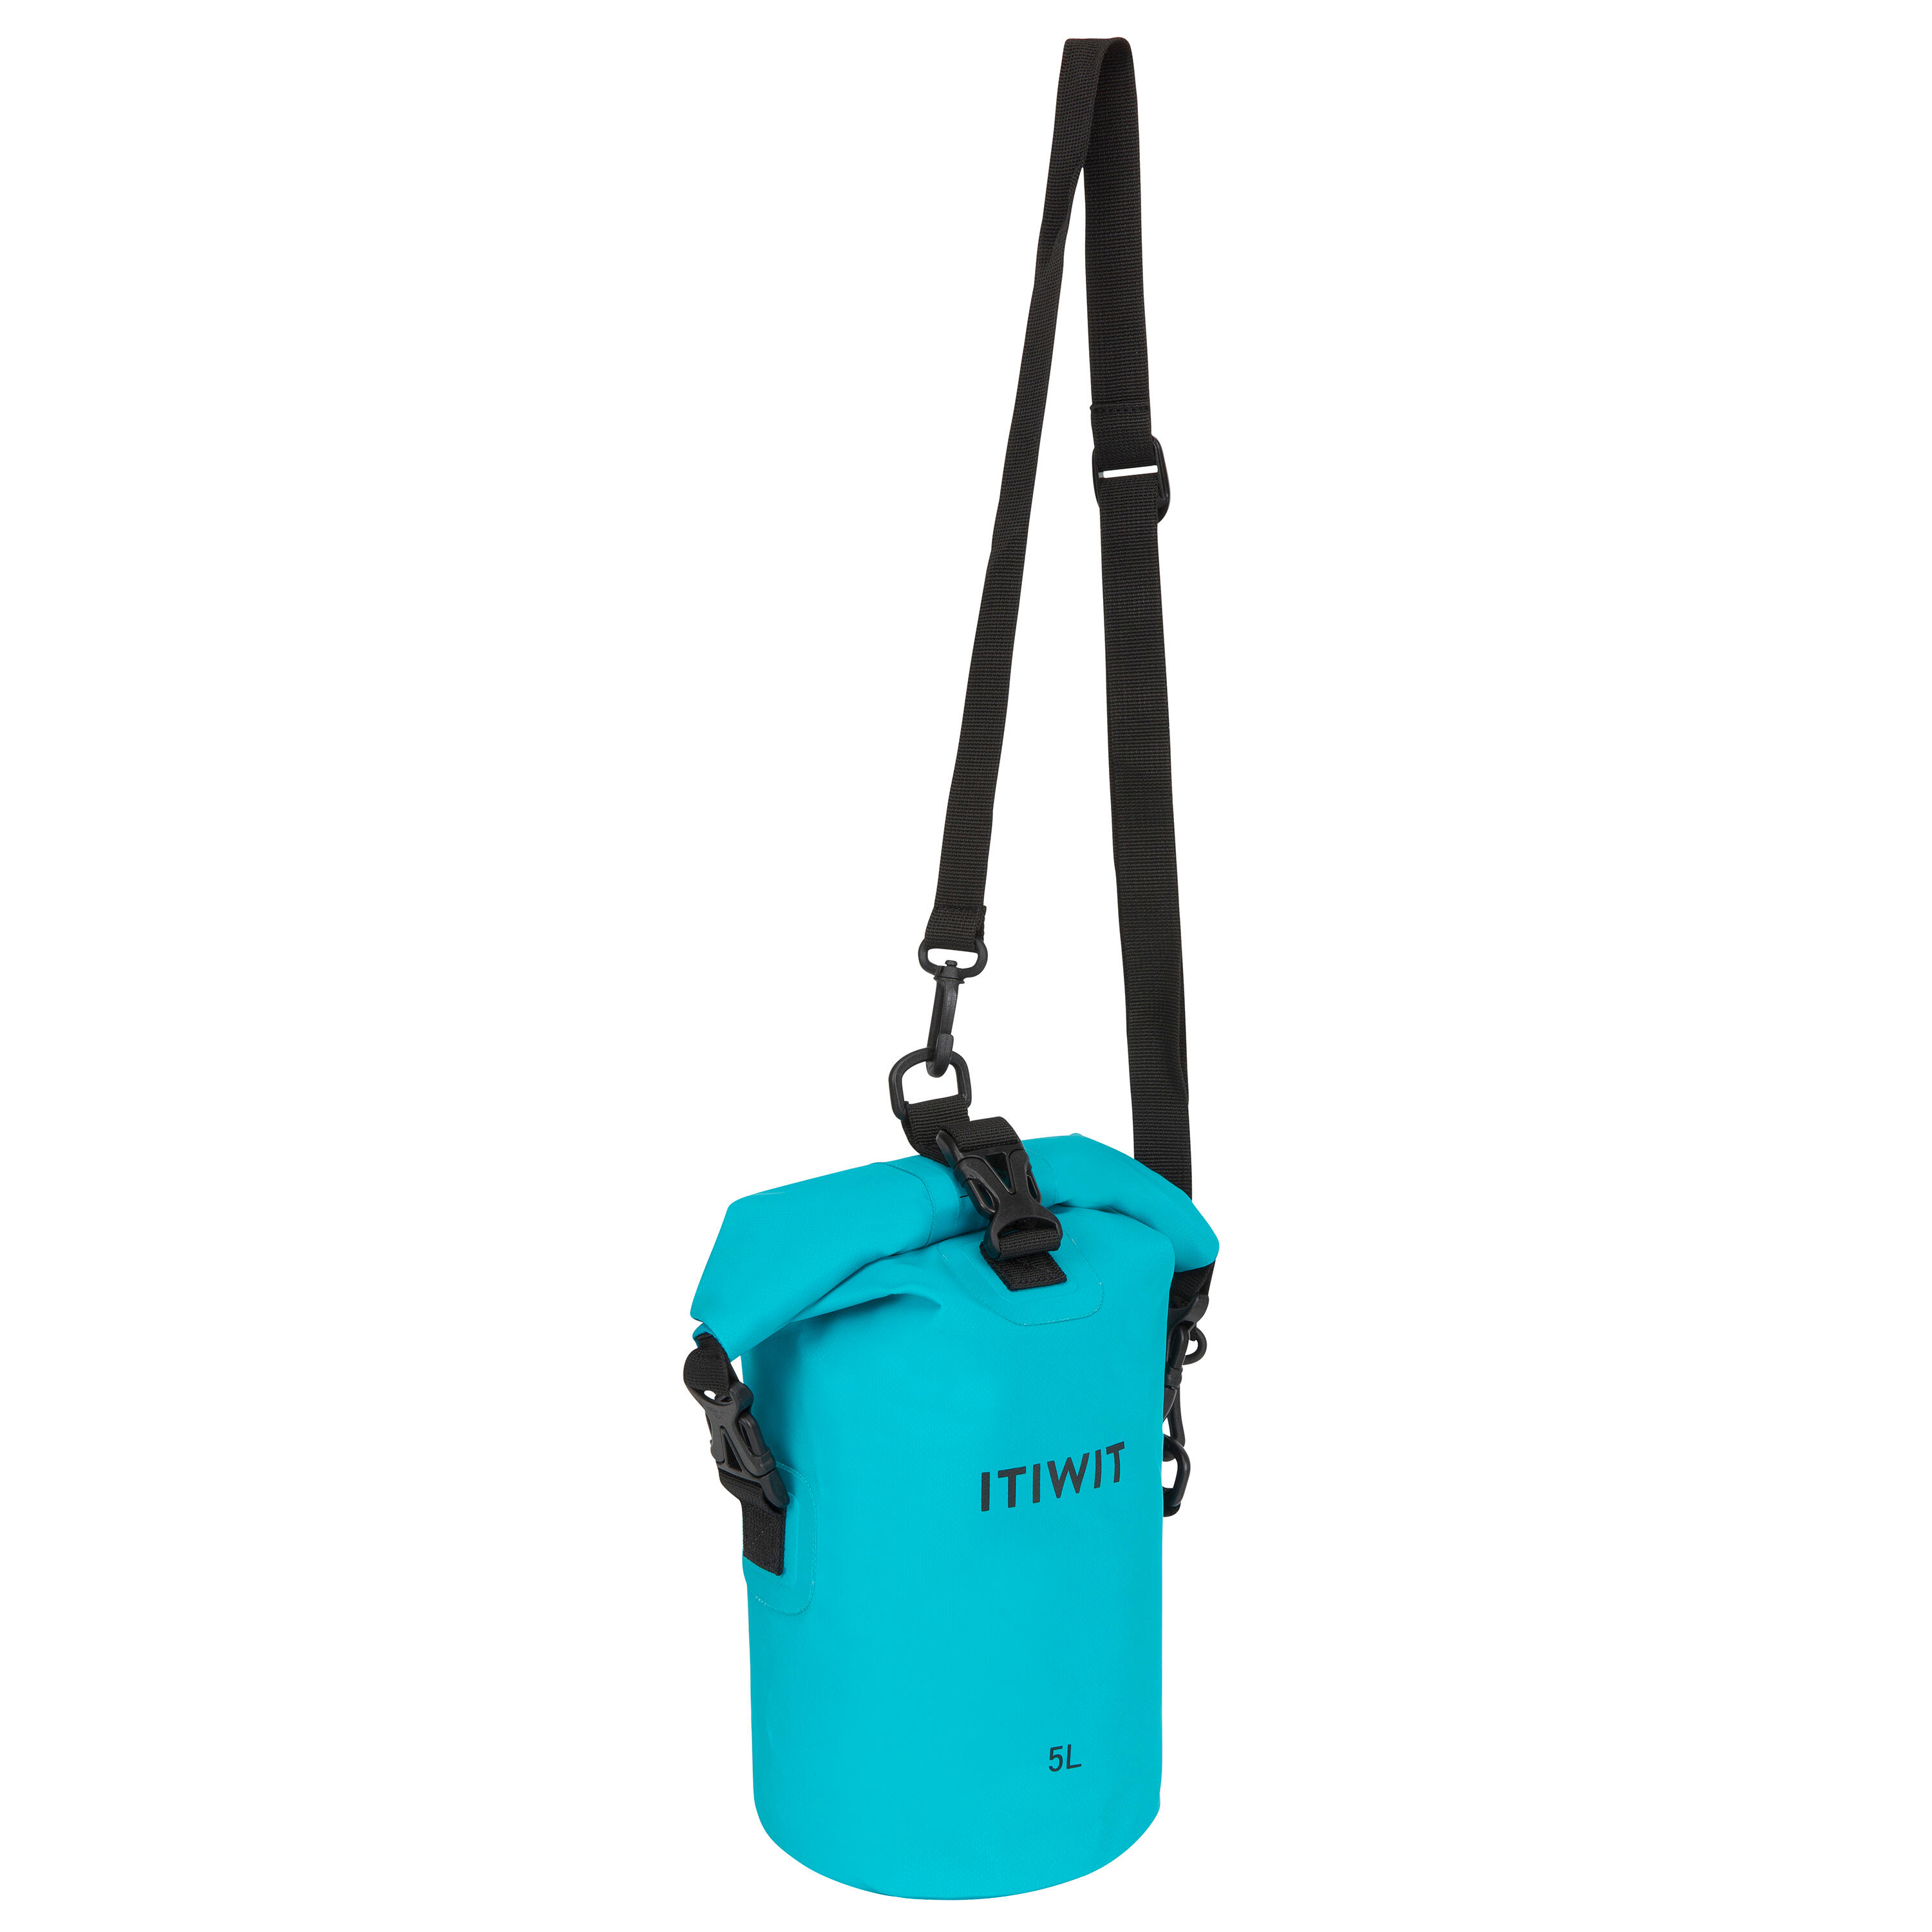 ITIWIT WATERPROOF DRY BAG 5 L - TURQUOISE